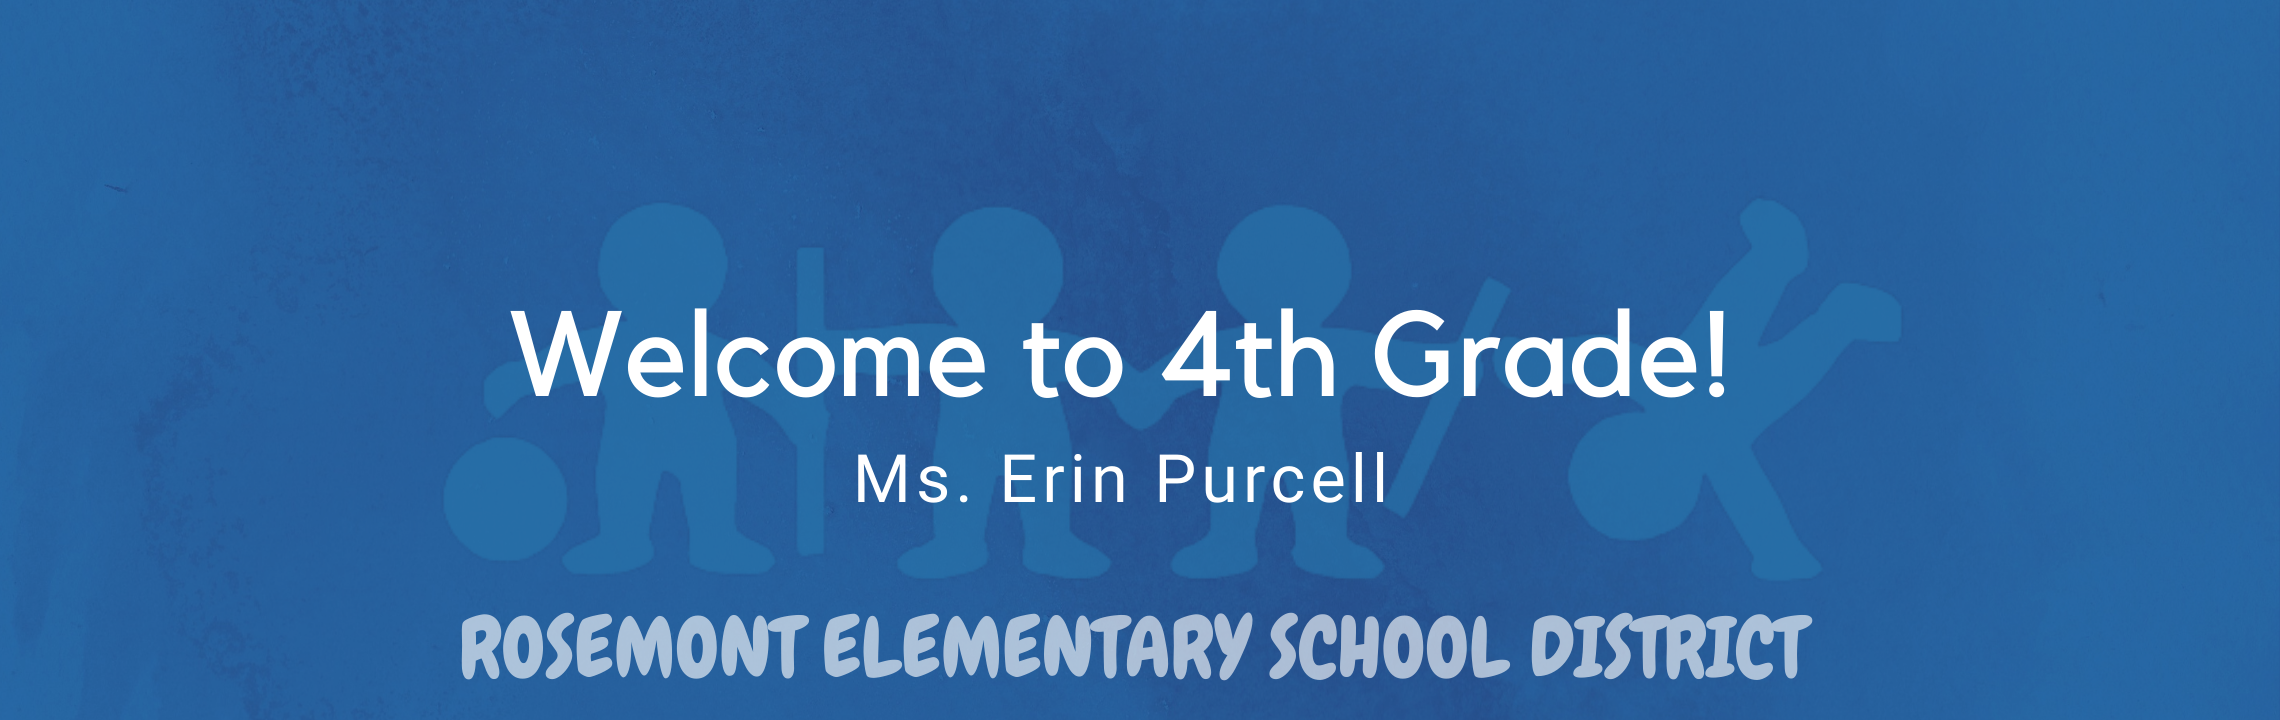 Welcome to 4th Grade, Ms. Erin Purcell, Rosemont Elementary Schools 